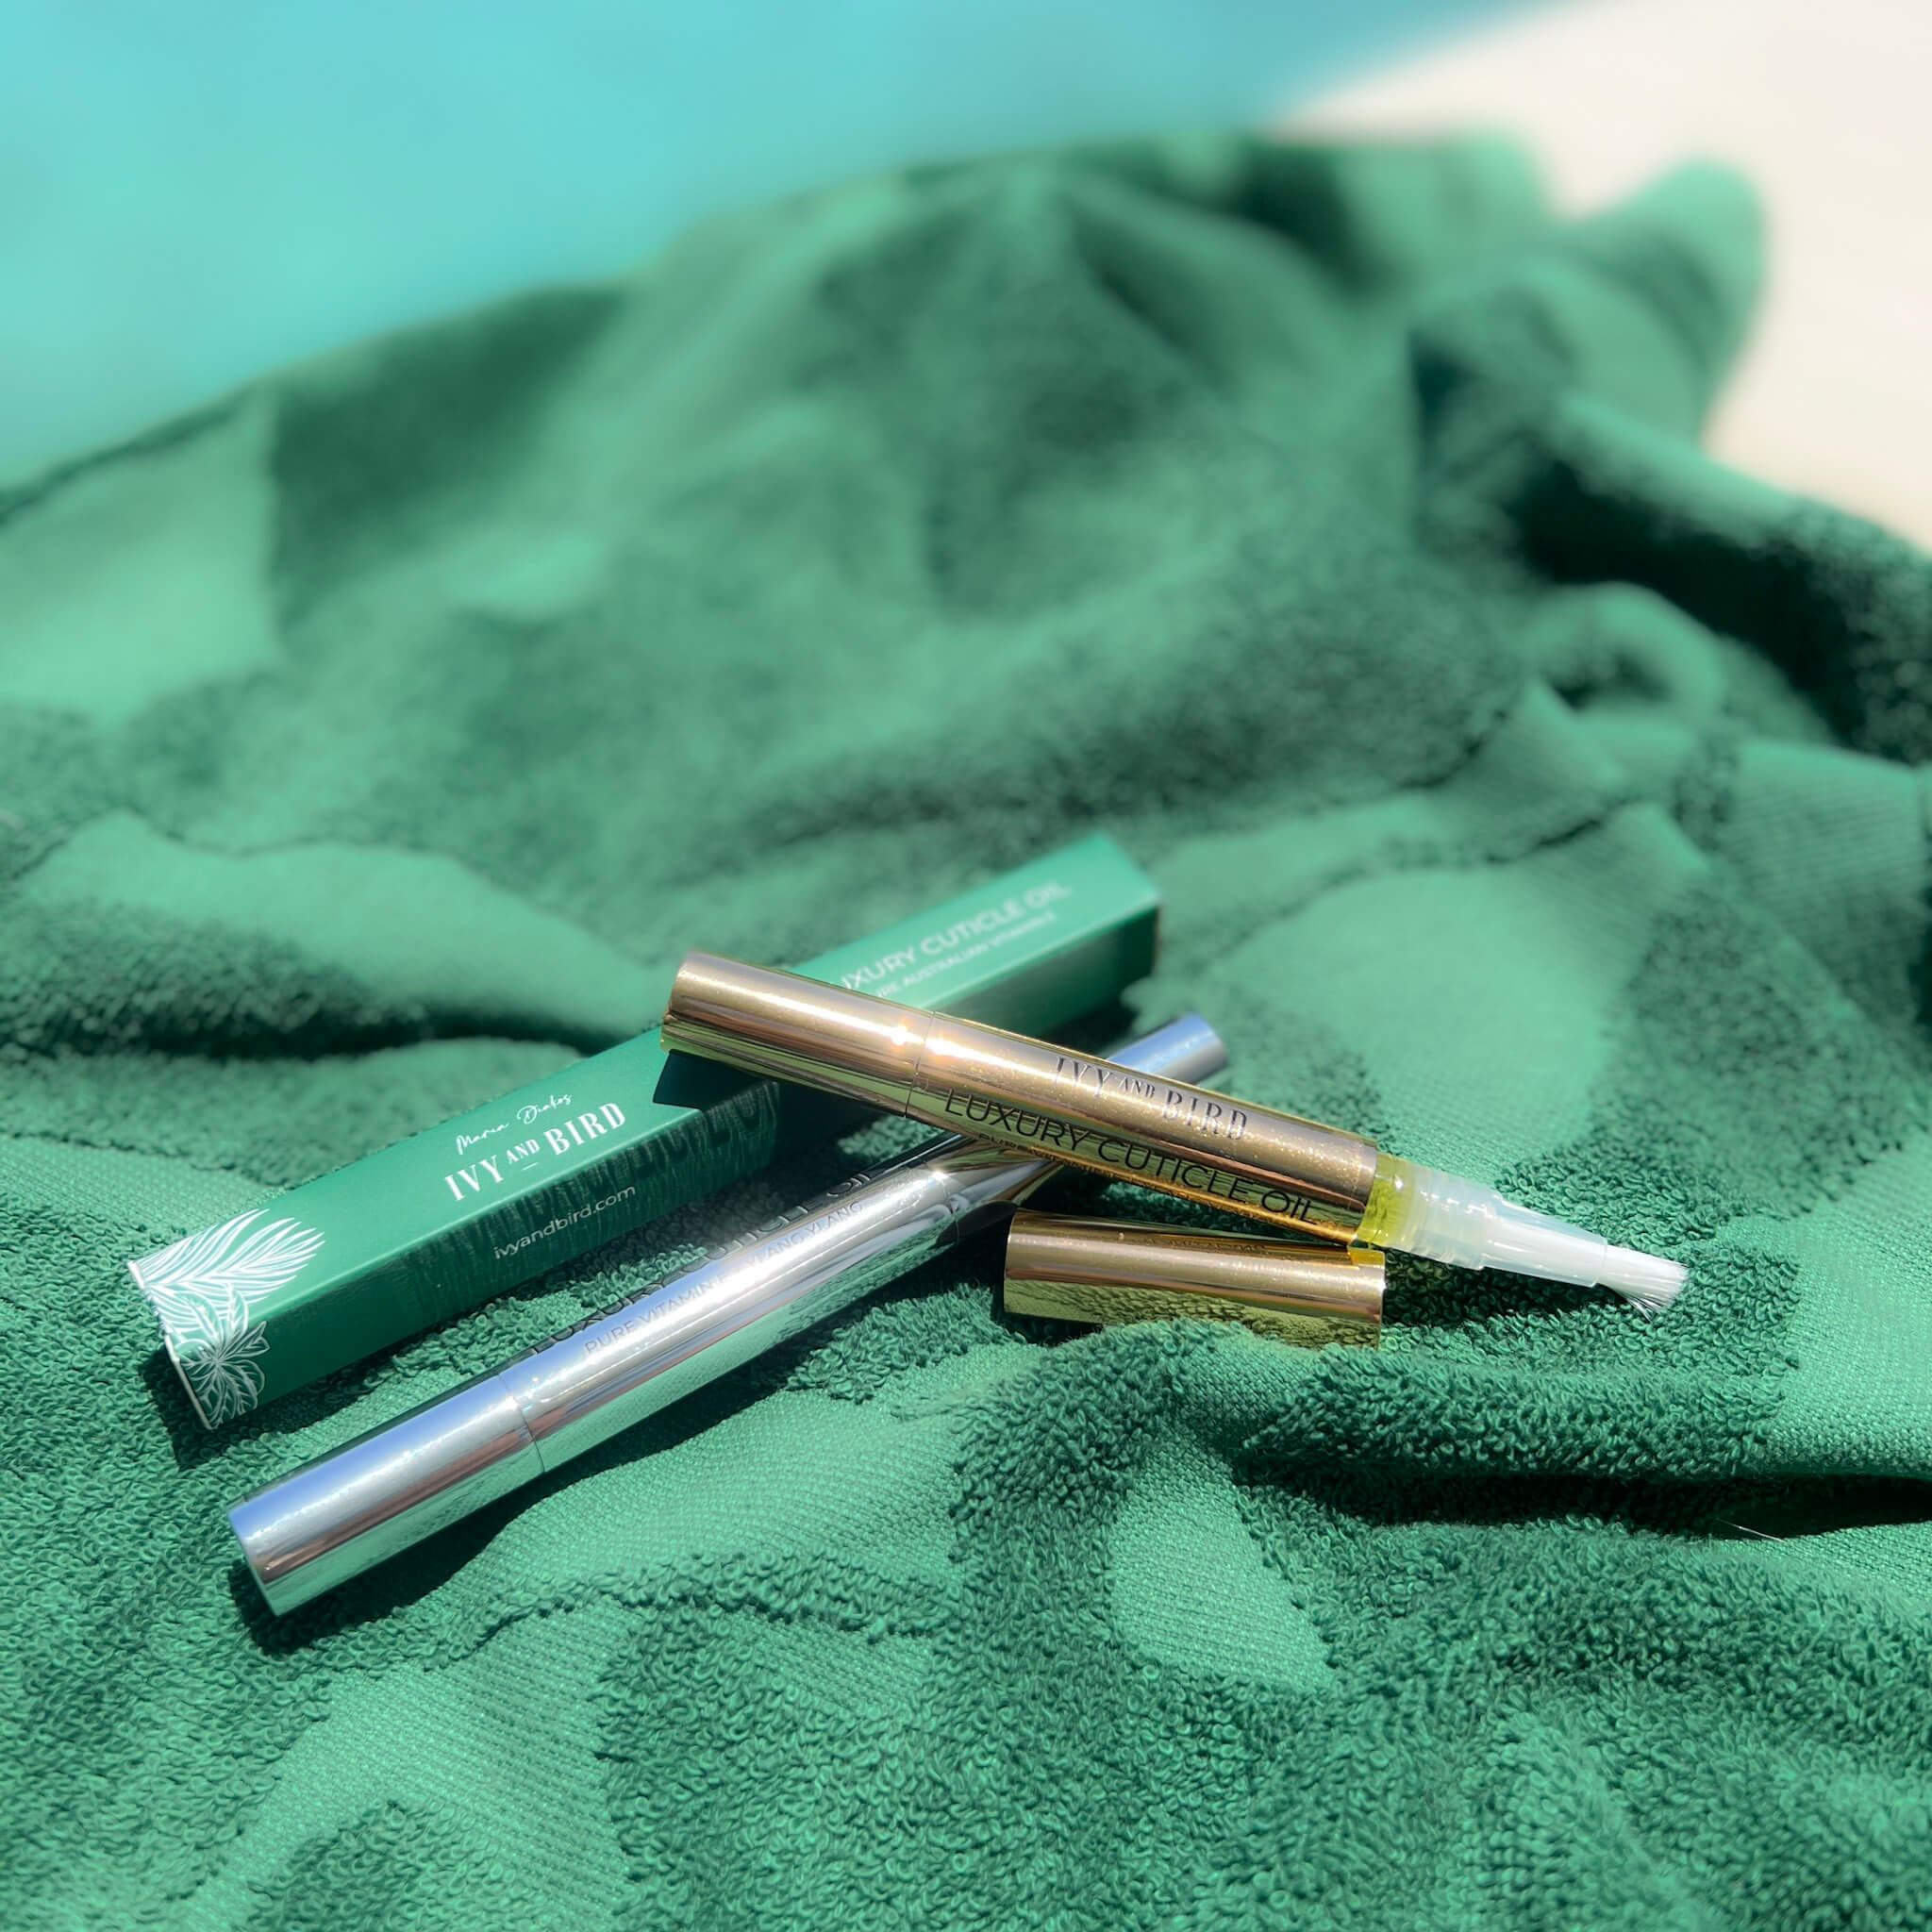 Cuticle oil pen on green beach towel by the pool